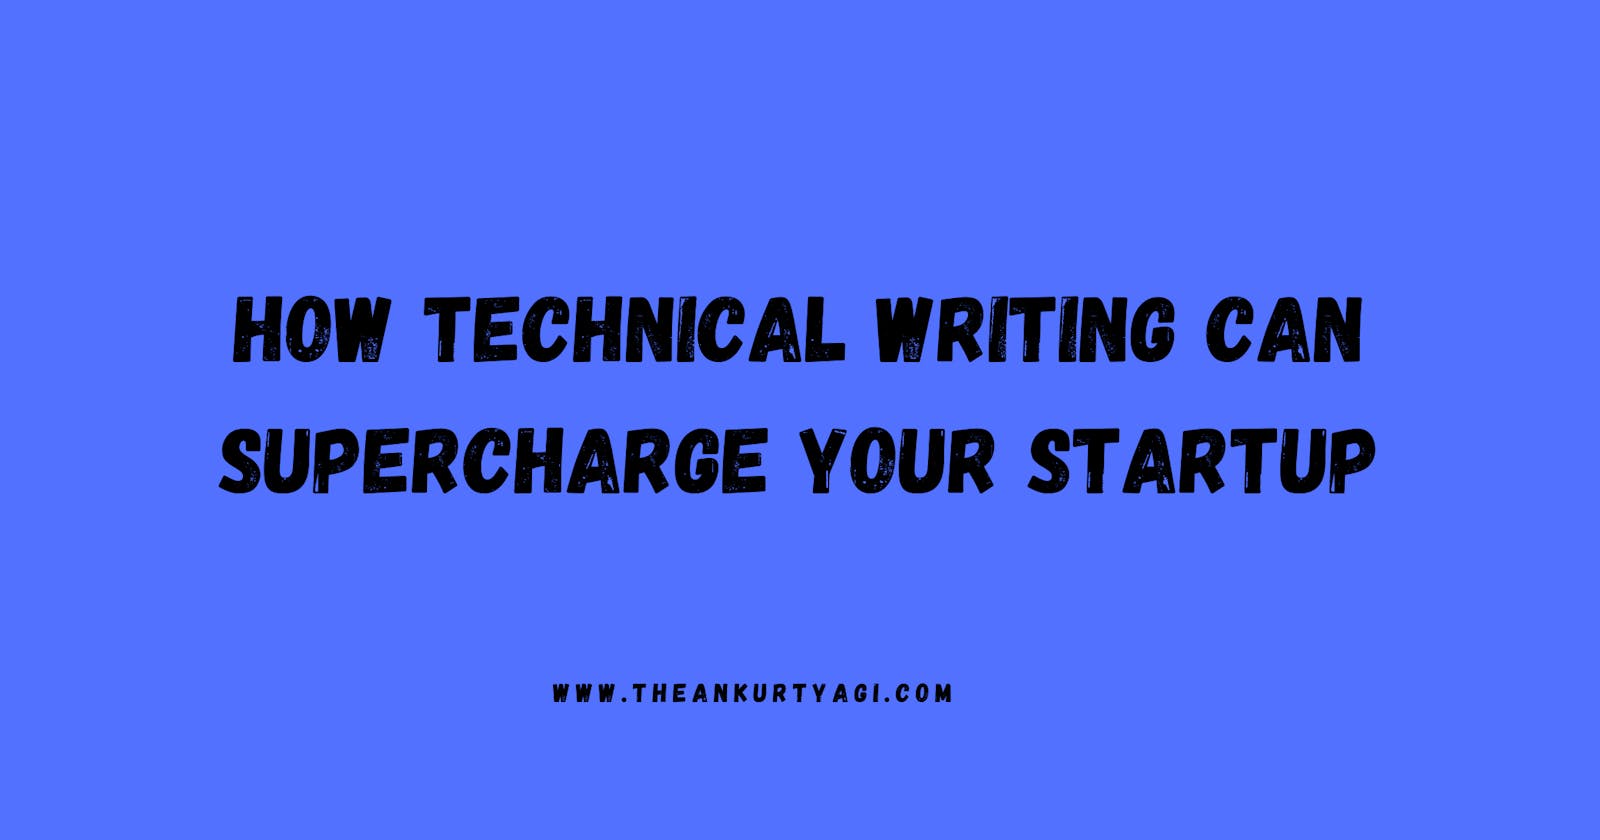 How Technical Writing Can Supercharge Your Startup